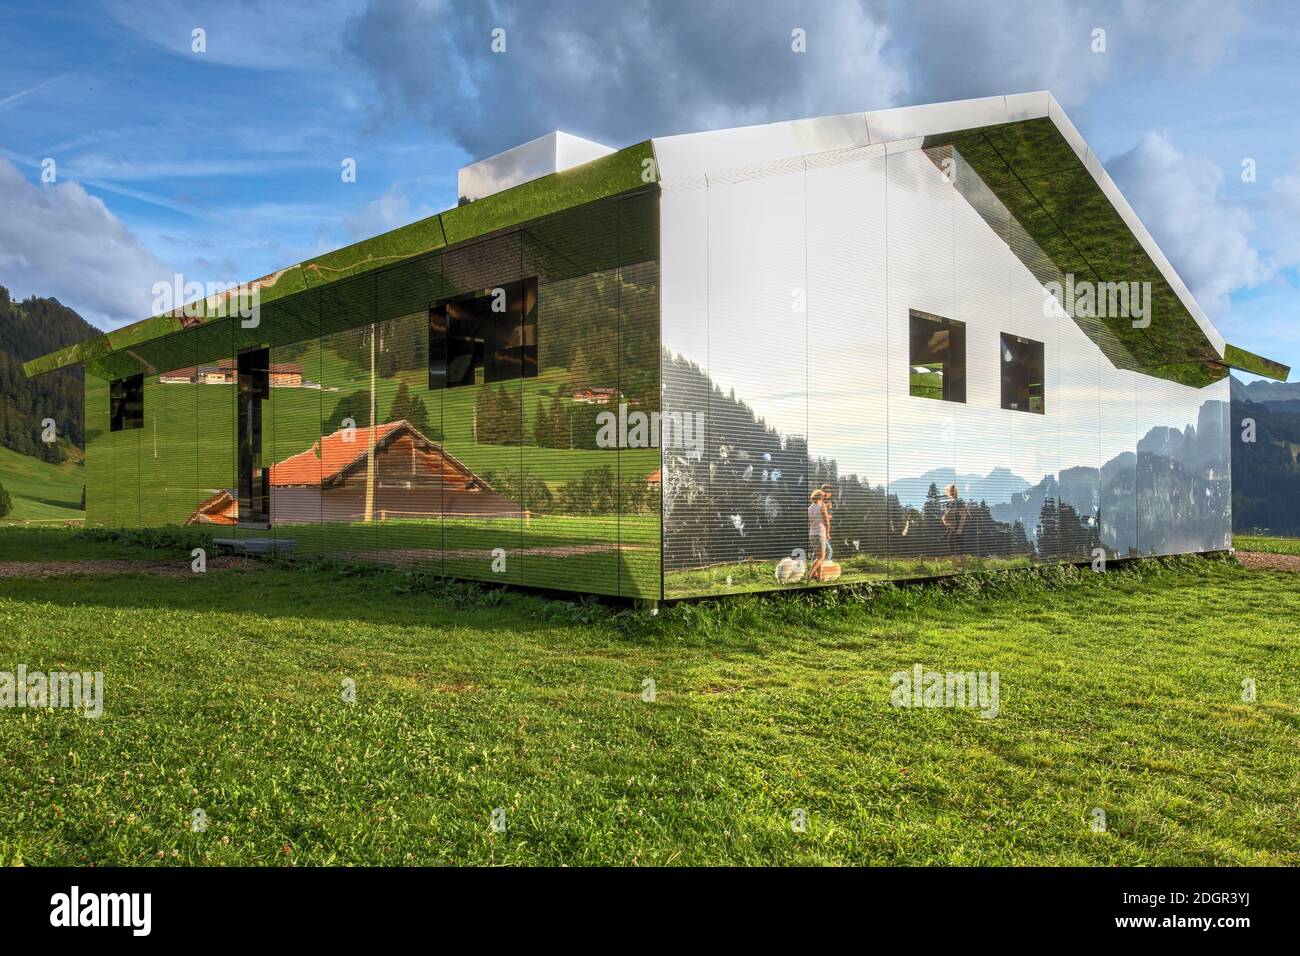 Gstaad, Switzerland - August 15, 2020 - Temporary art instalation by Doug Aitken, Mirage consist of a house of mirrors on a hiking trail between Schön Stock Photo